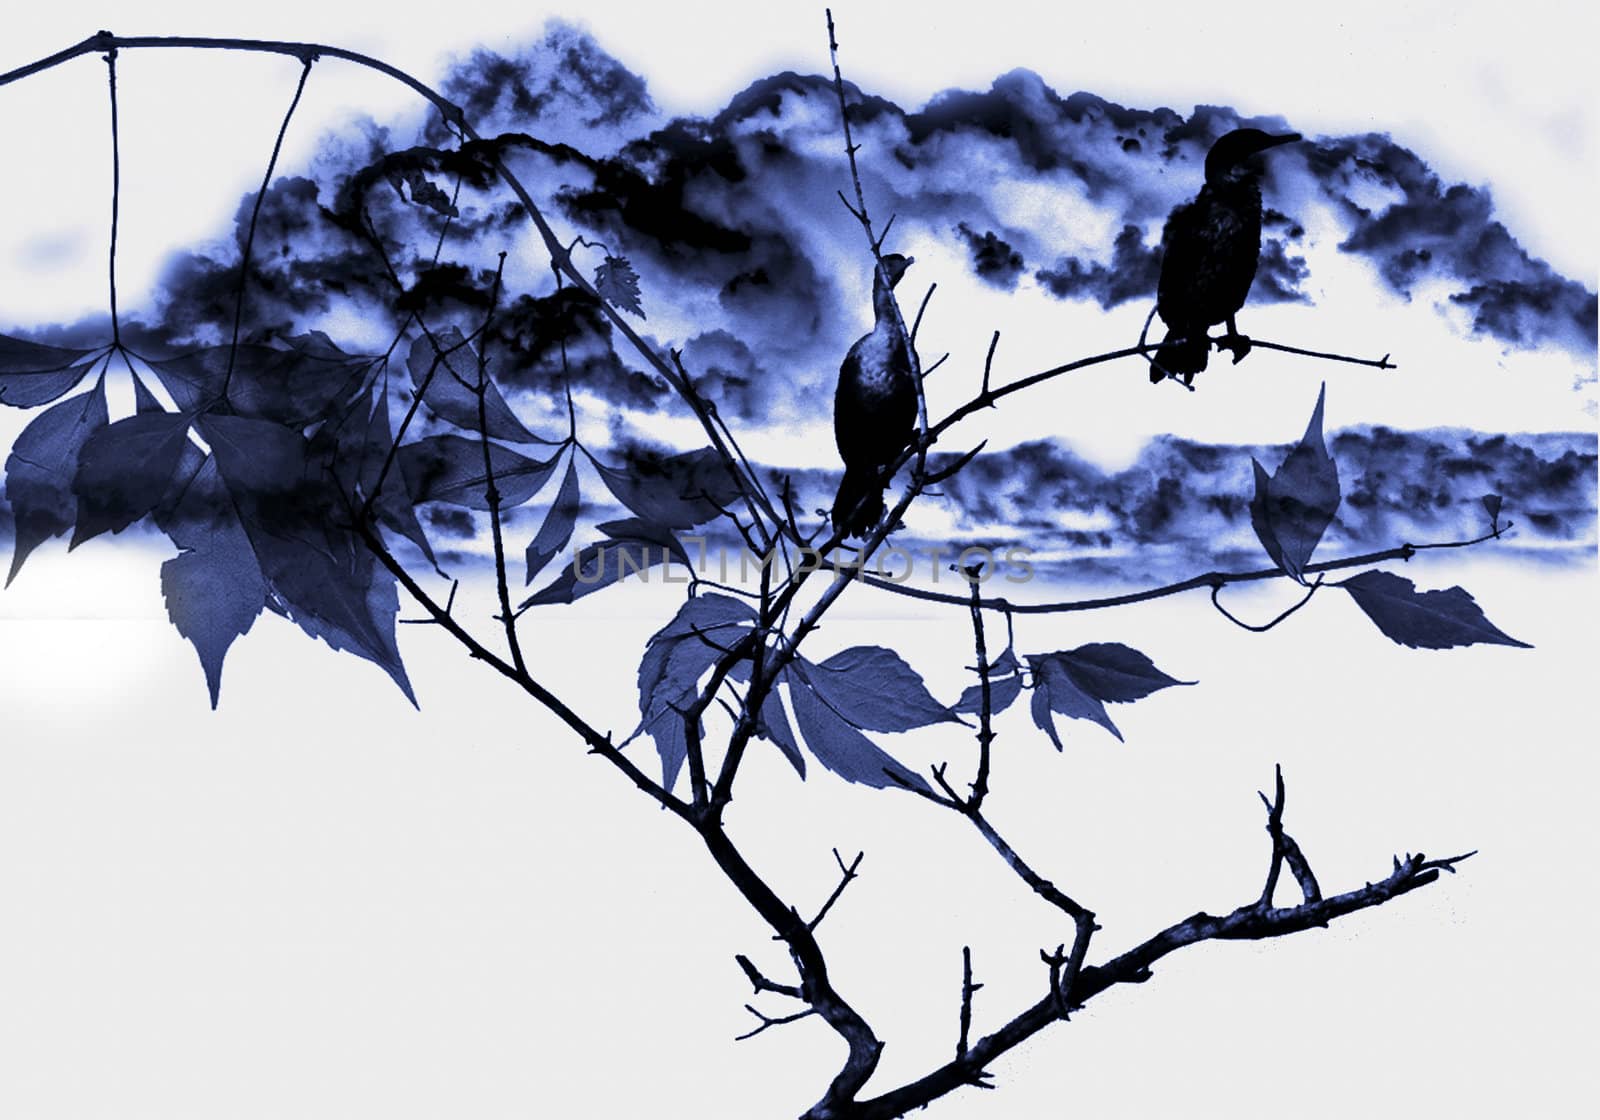 washed out illustration of grassy meadow with bird on tree branch